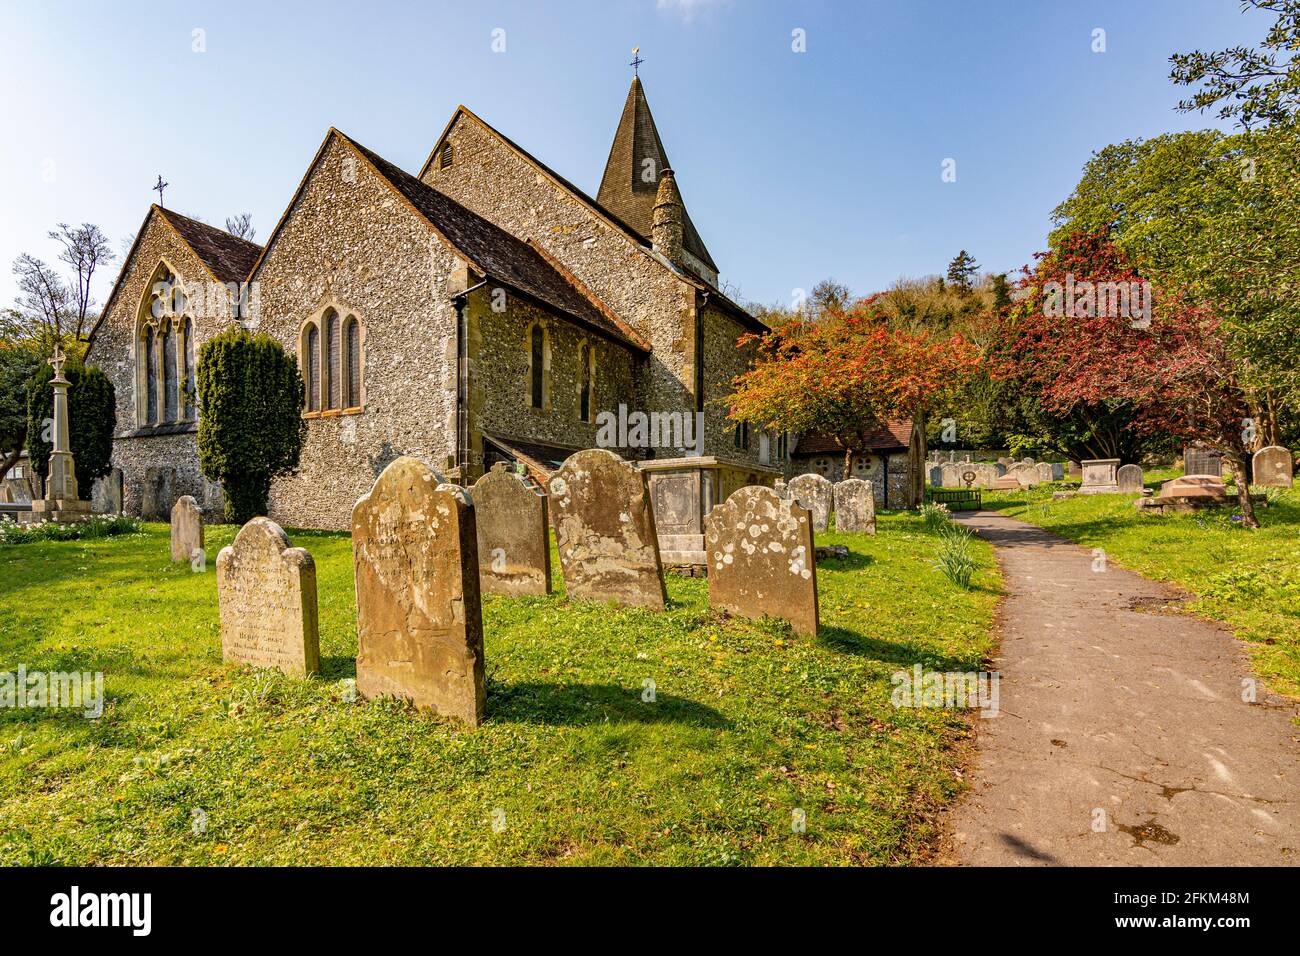 The St. John the Baptist village church, Findon, West Sussex, England, UK. Stock Photo